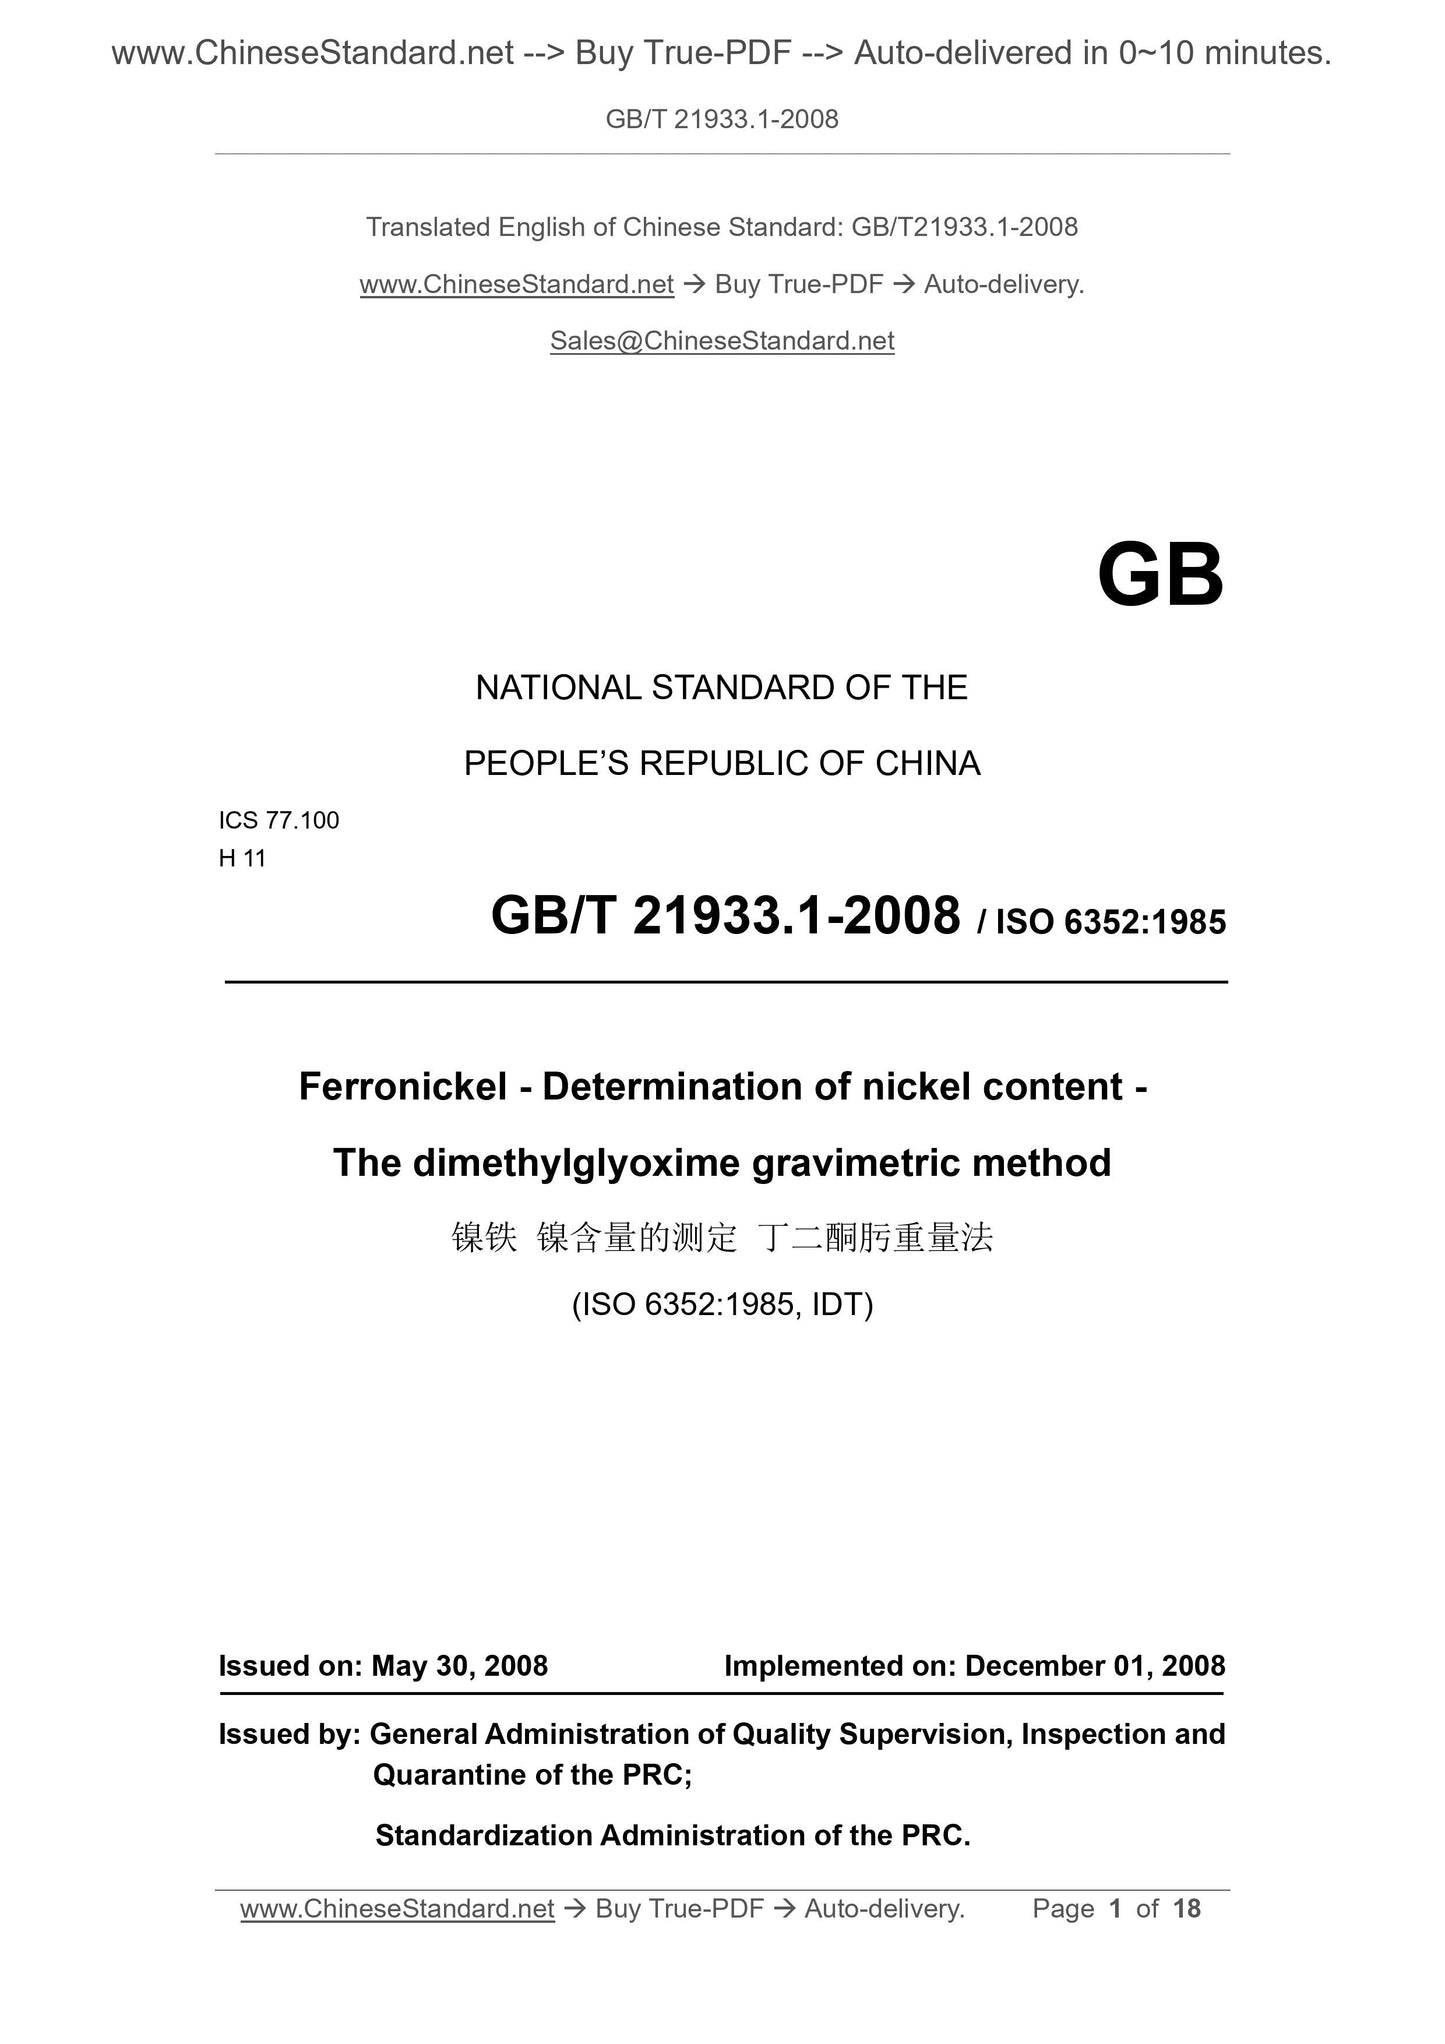 GB/T 21933.1-2008 Page 1